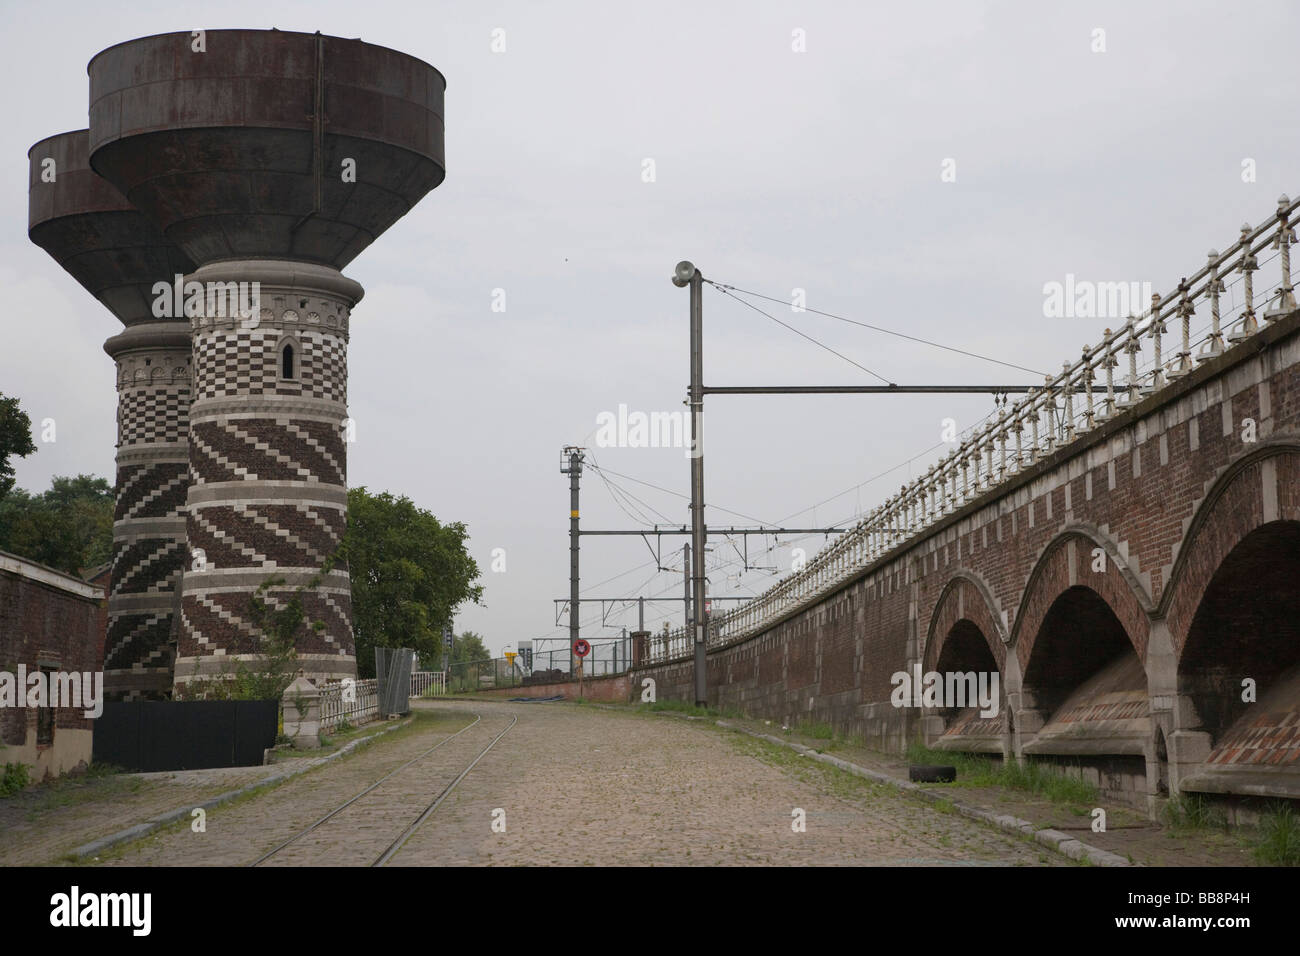 Two water towers used for the steam trains, Omheining statie van borgerhout, Antwerp, Belgium Stock Photo